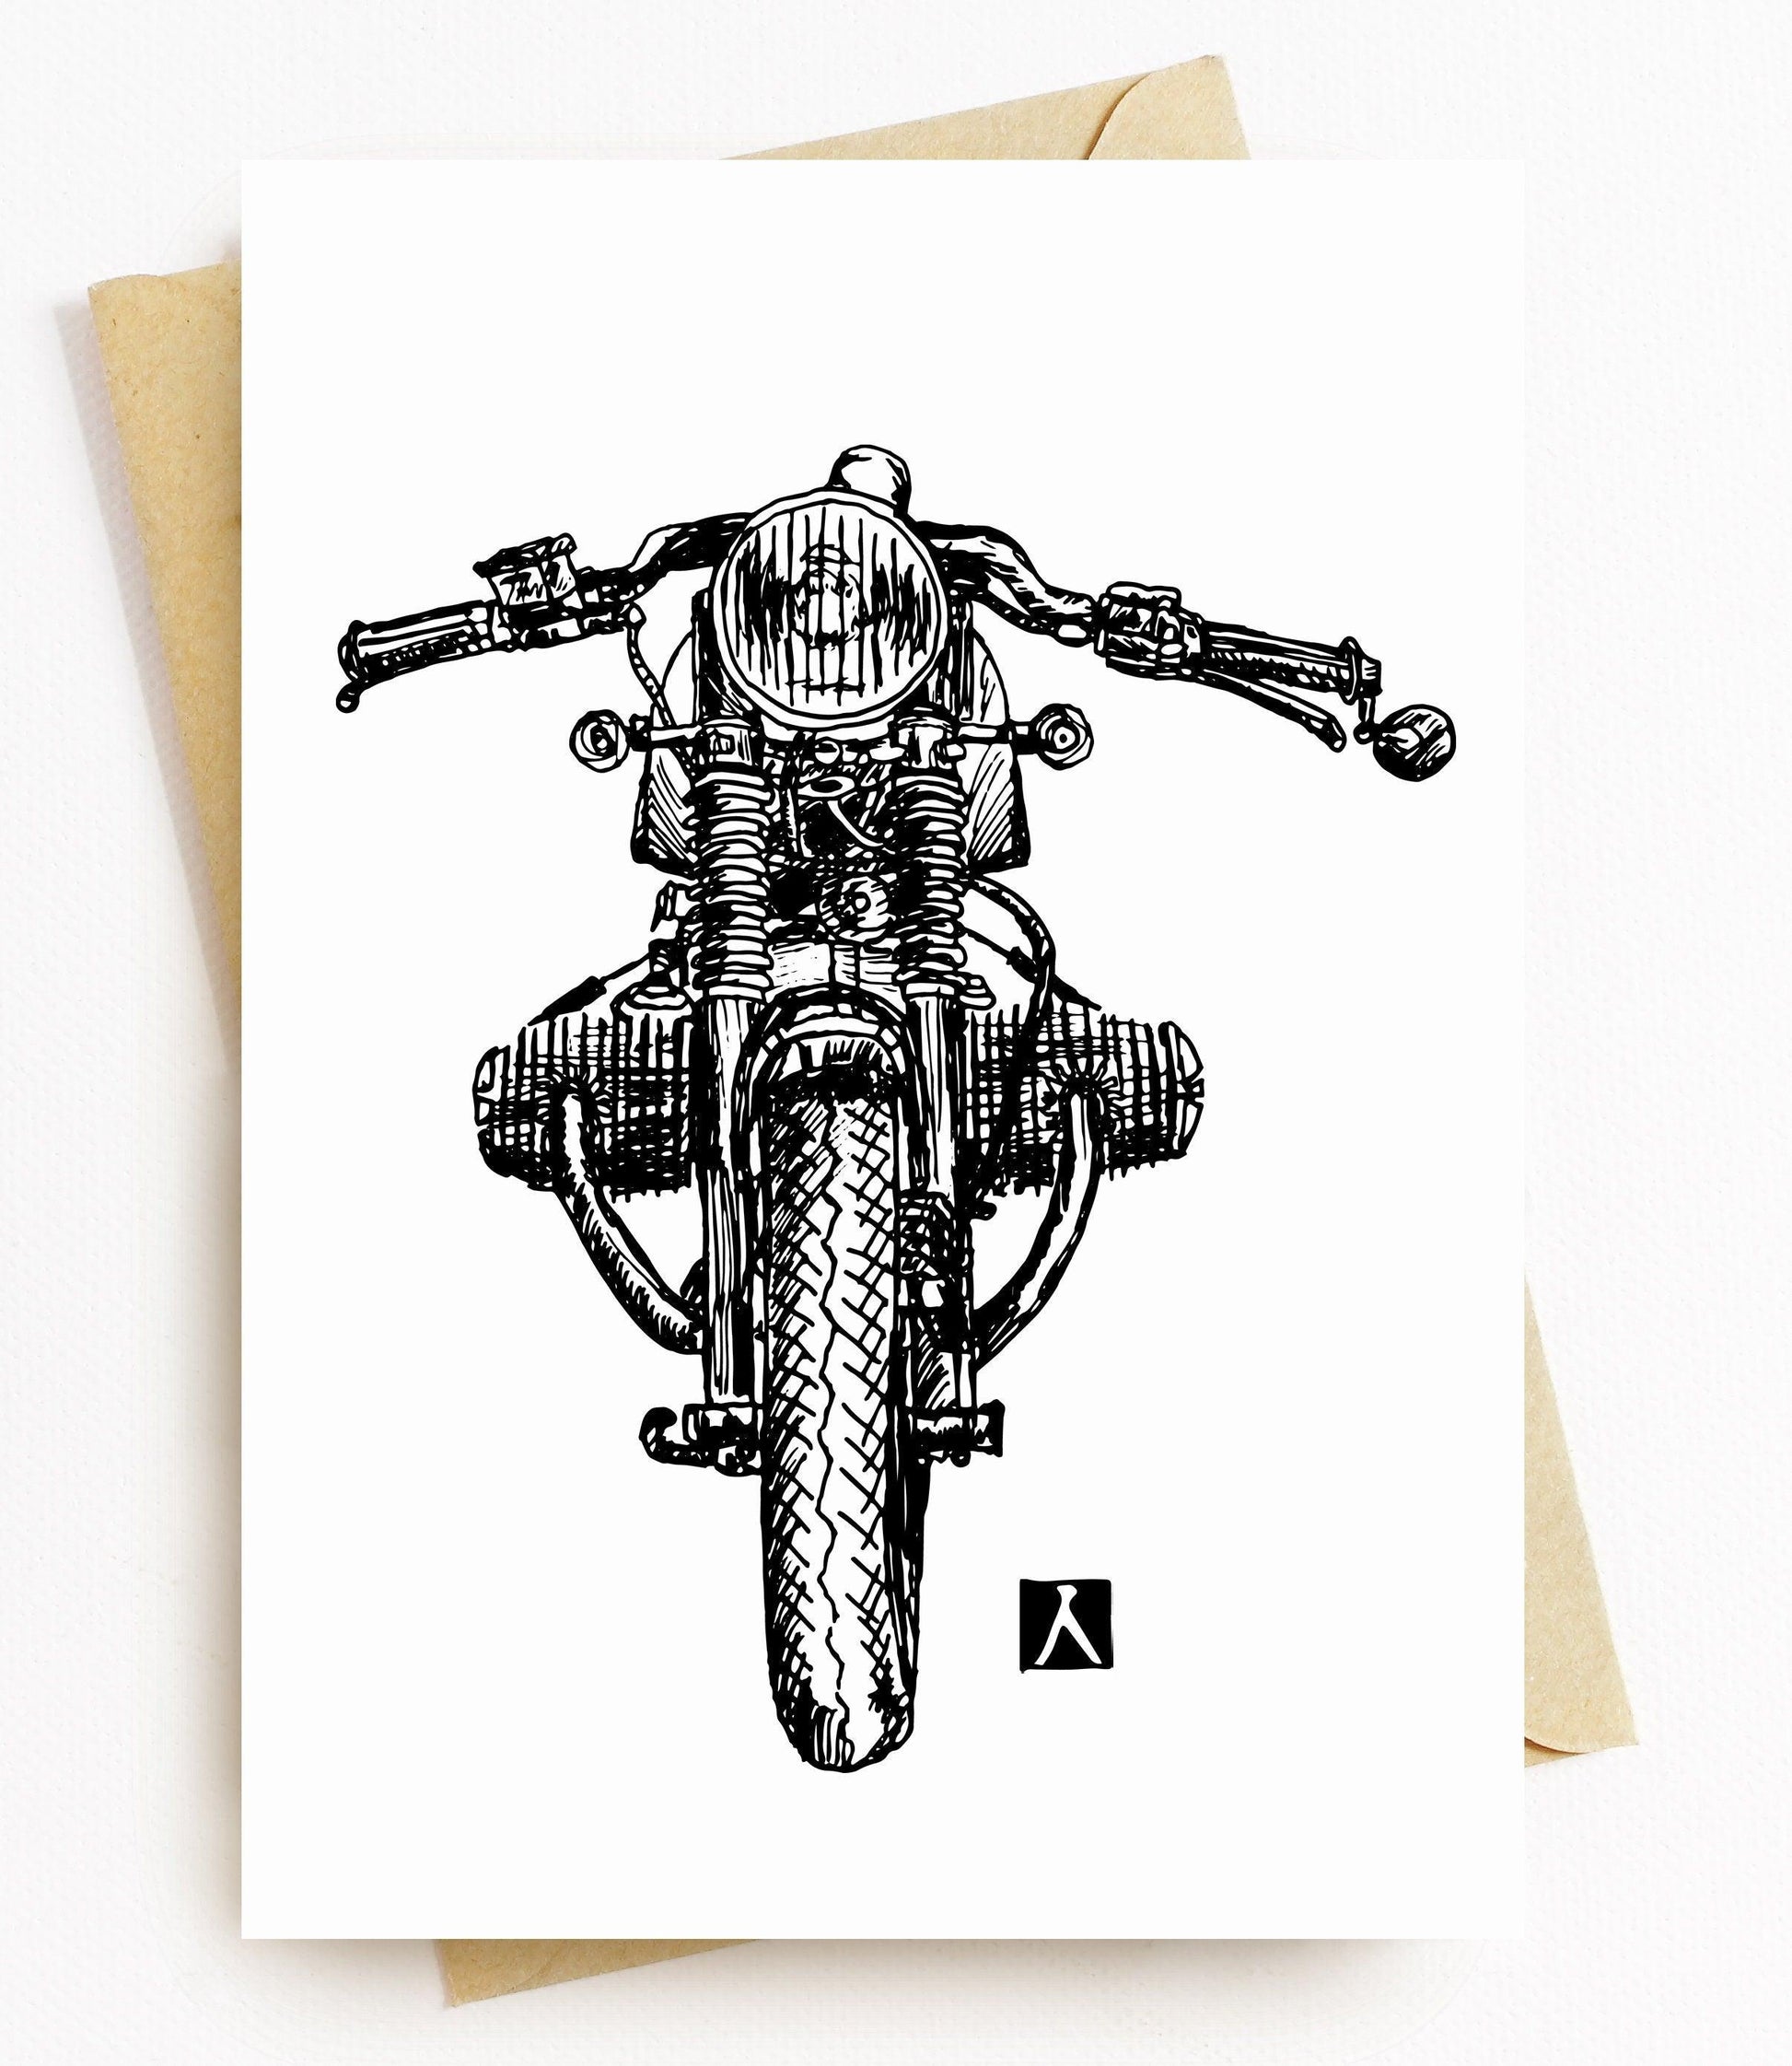 BellavanceInk: Greeting Card With A Pen & Ink Drawing Of A Cafe Racer Motorcycle 5 x 7 Inches - BellavanceInk